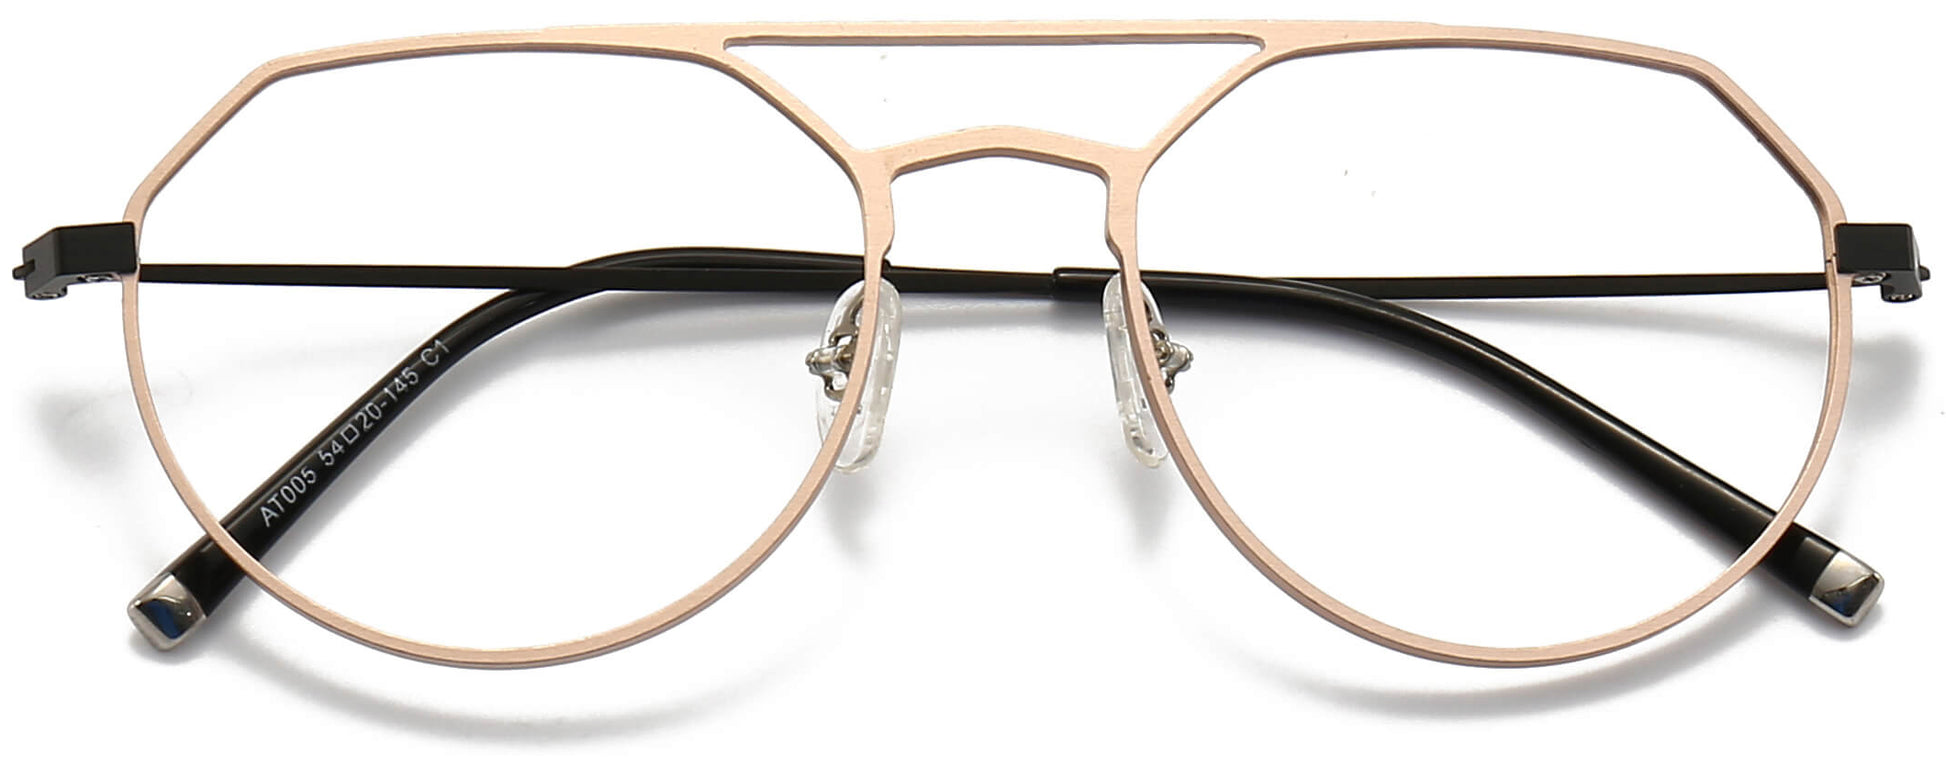 Dfiyy Round Gold Eyeglasses from ANRRI, closed view